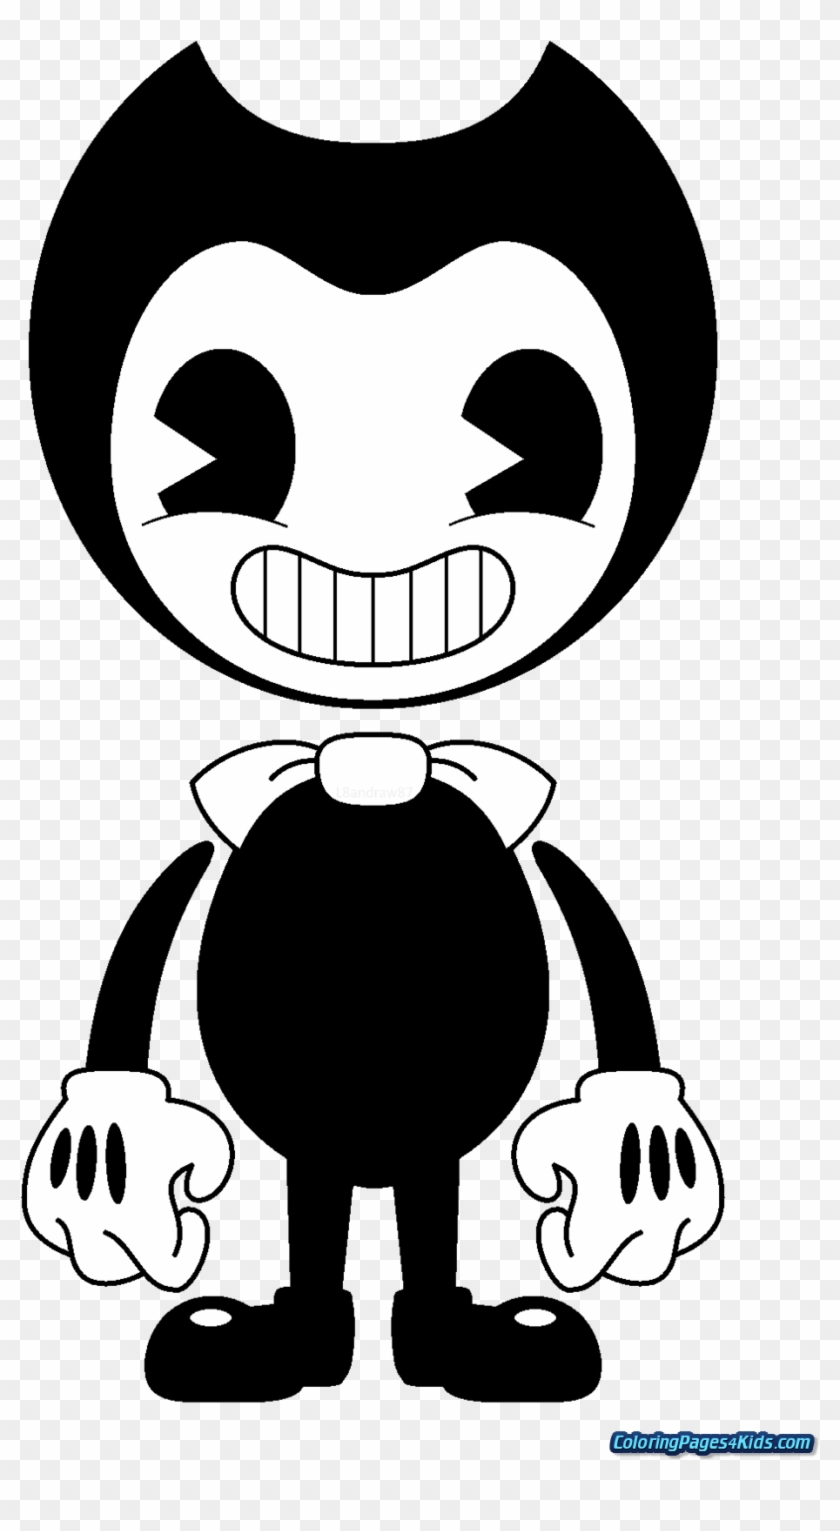 Coloring Pages Bendy And The Ink Machine Coloring Pages Bendy And The Ink Machine Characters Hd Png Download 1024x1714 1586257 Pngfind